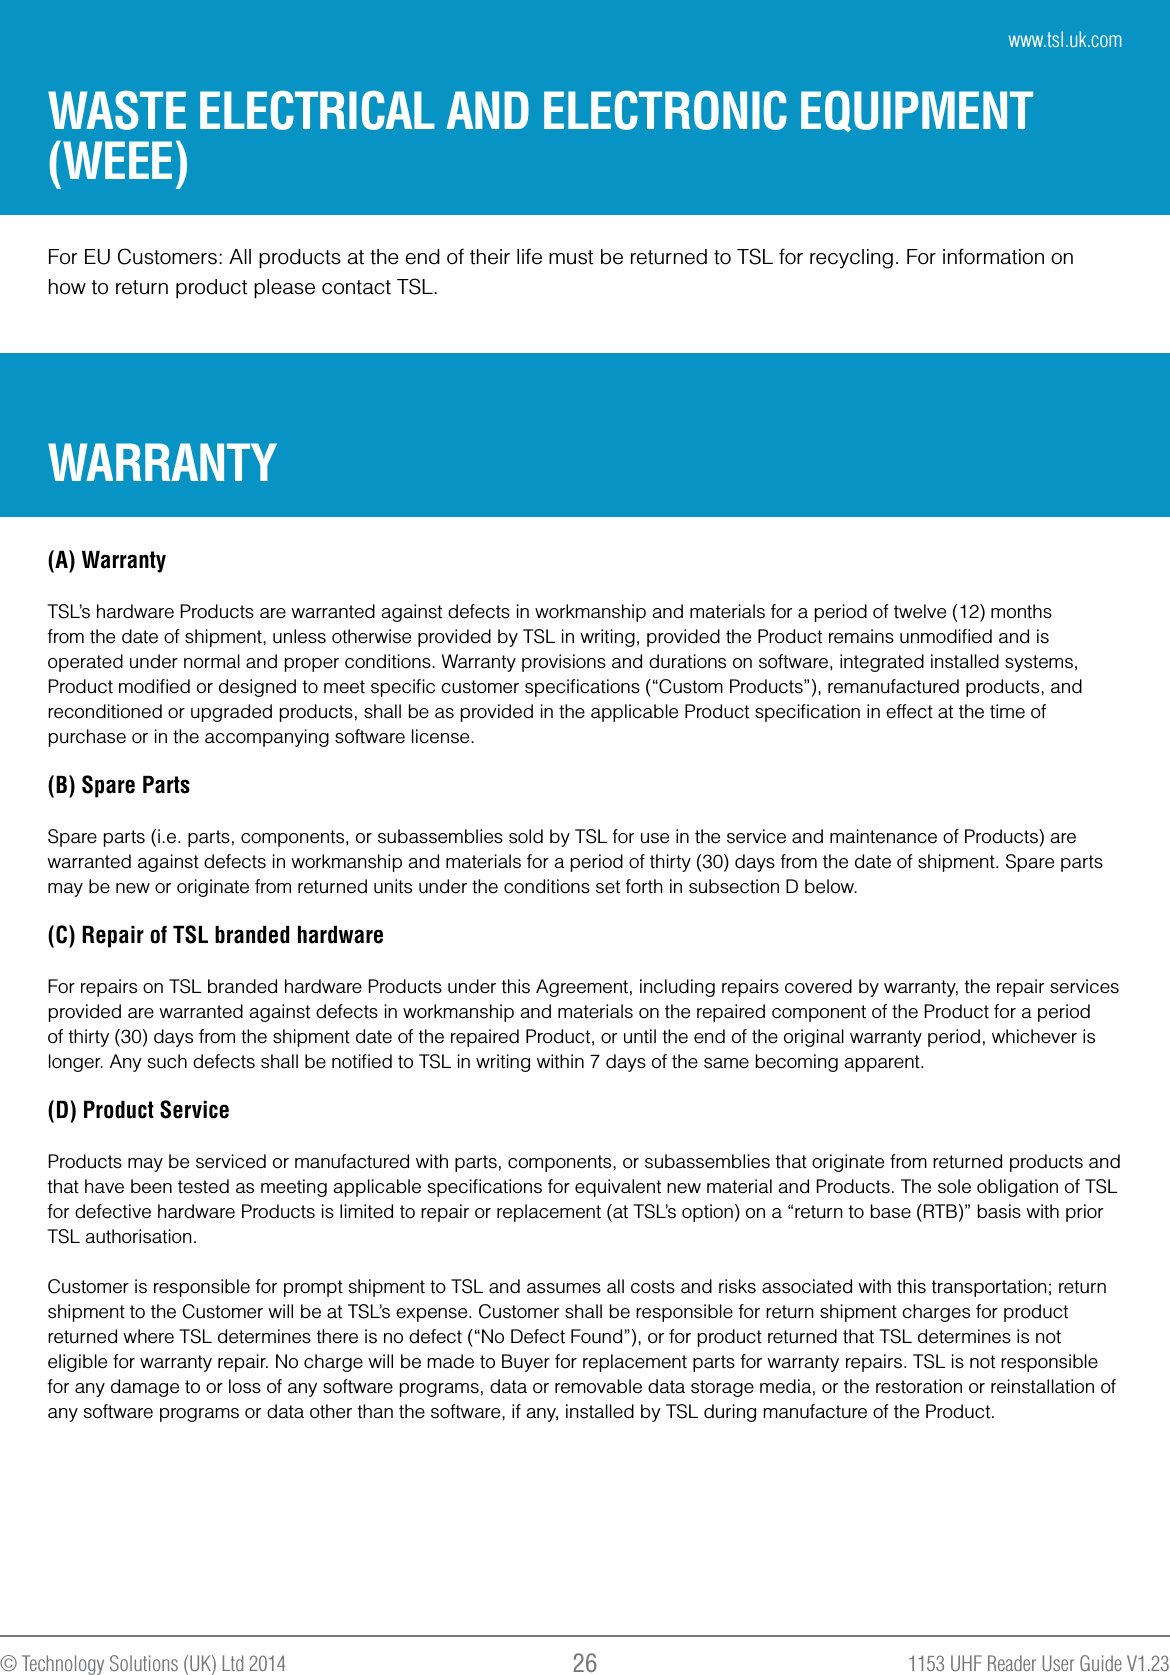 1153 UHF Reader User Guide V1.23© Technology Solutions (UK) Ltd 2014 26For EU Customers: All products at the end of their life must be returned to TSL for recycling. For information onhow to return product please contact TSL.WARRANTYWASTE ELECTRICAL AND ELECTRONIC EQUIPMENT (WEEE)(A) WarrantyTSL’s hardware Products are warranted against defects in workmanship and materials for a period of twelve (12) months from the date of shipment, unless otherwise provided by TSL in writing, provided the Product remains unmodiﬁed and is operated under normal and proper conditions. Warranty provisions and durations on software, integrated installed systems, Product modiﬁed or designed to meet speciﬁc customer speciﬁcations (“Custom Products”), remanufactured products, and reconditioned or upgraded products, shall be as provided in the applicable Product speciﬁcation in effect at the time of purchase or in the accompanying software license. (B) Spare PartsSpare parts (i.e. parts, components, or subassemblies sold by TSL for use in the service and maintenance of Products) are warranted against defects in workmanship and materials for a period of thirty (30) days from the date of shipment. Spare parts may be new or originate from returned units under the conditions set forth in subsection D below.(C) Repair of TSL branded hardware For repairs on TSL branded hardware Products under this Agreement, including repairs covered by warranty, the repair services provided are warranted against defects in workmanship and materials on the repaired component of the Product for a period of thirty (30) days from the shipment date of the repaired Product, or until the end of the original warranty period, whichever is longer. Any such defects shall be notiﬁed to TSL in writing within 7 days of the same becoming apparent.(D) Product Service Products may be serviced or manufactured with parts, components, or subassemblies that originate from returned products and that have been tested as meeting applicable speciﬁcations for equivalent new material and Products. The sole obligation of TSL for defective hardware Products is limited to repair or replacement (at TSL’s option) on a “return to base (RTB)” basis with prior TSL authorisation.Customer is responsible for prompt shipment to TSL and assumes all costs and risks associated with this transportation; return shipment to the Customer will be at TSL’s expense. Customer shall be responsible for return shipment charges for product returned where TSL determines there is no defect (“No Defect Found”), or for product returned that TSL determines is not eligible for warranty repair. No charge will be made to Buyer for replacement parts for warranty repairs. TSL is not responsible for any damage to or loss of any software programs, data or removable data storage media, or the restoration or reinstallation of any software programs or data other than the software, if any, installed by TSL during manufacture of the Product.www.tsl.uk.com